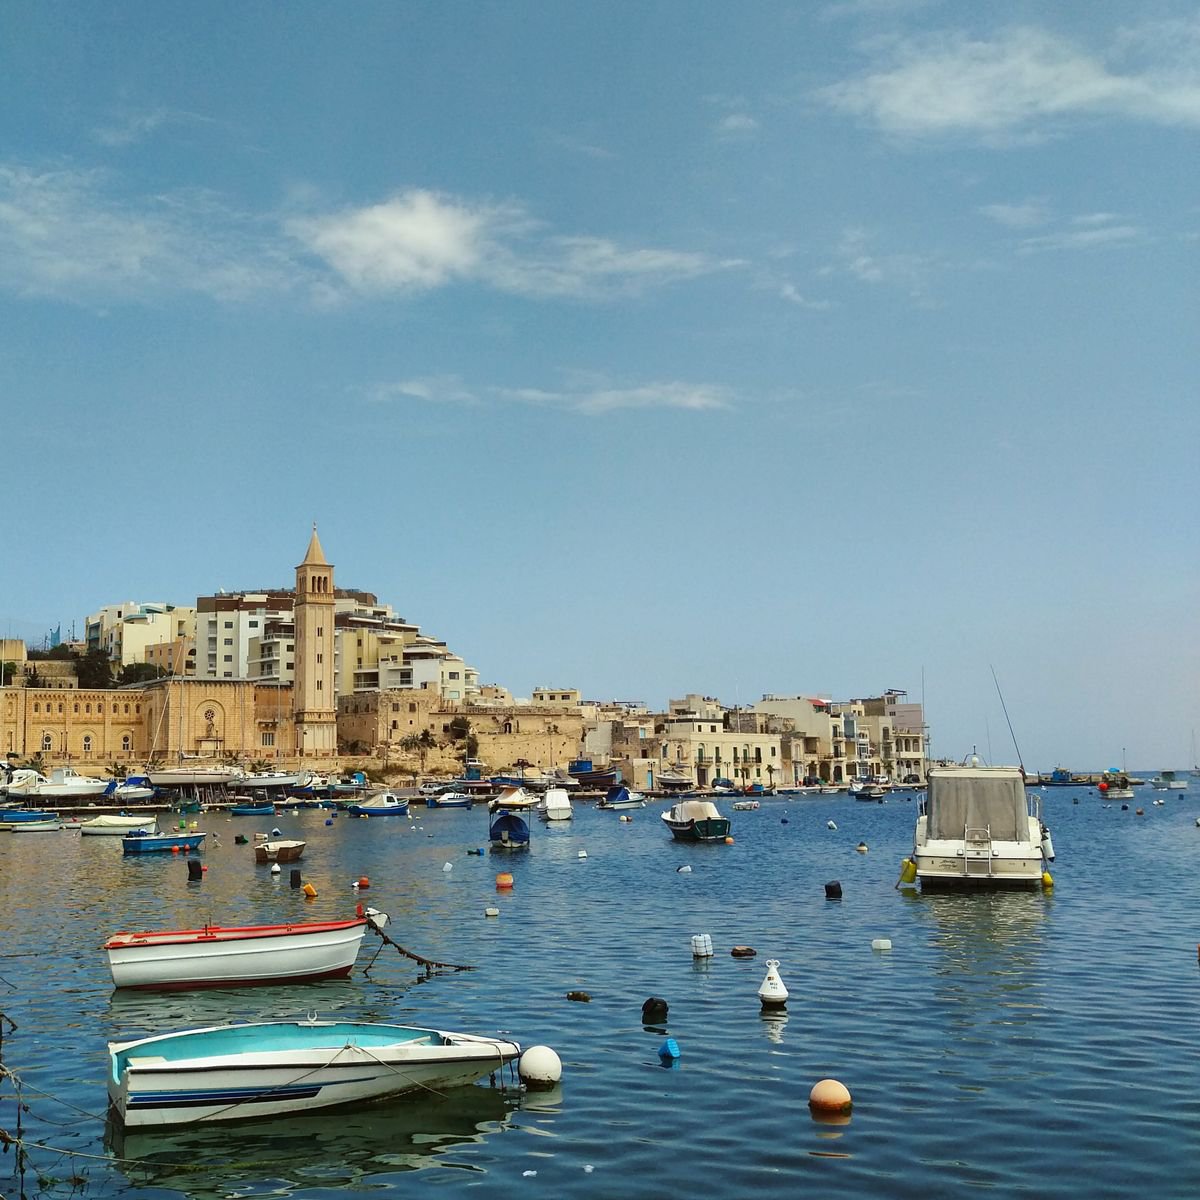 I Was Happy - Malta Travel Photography Print, 12x12 Inches, C-Type, Unframed by Amadeus Long